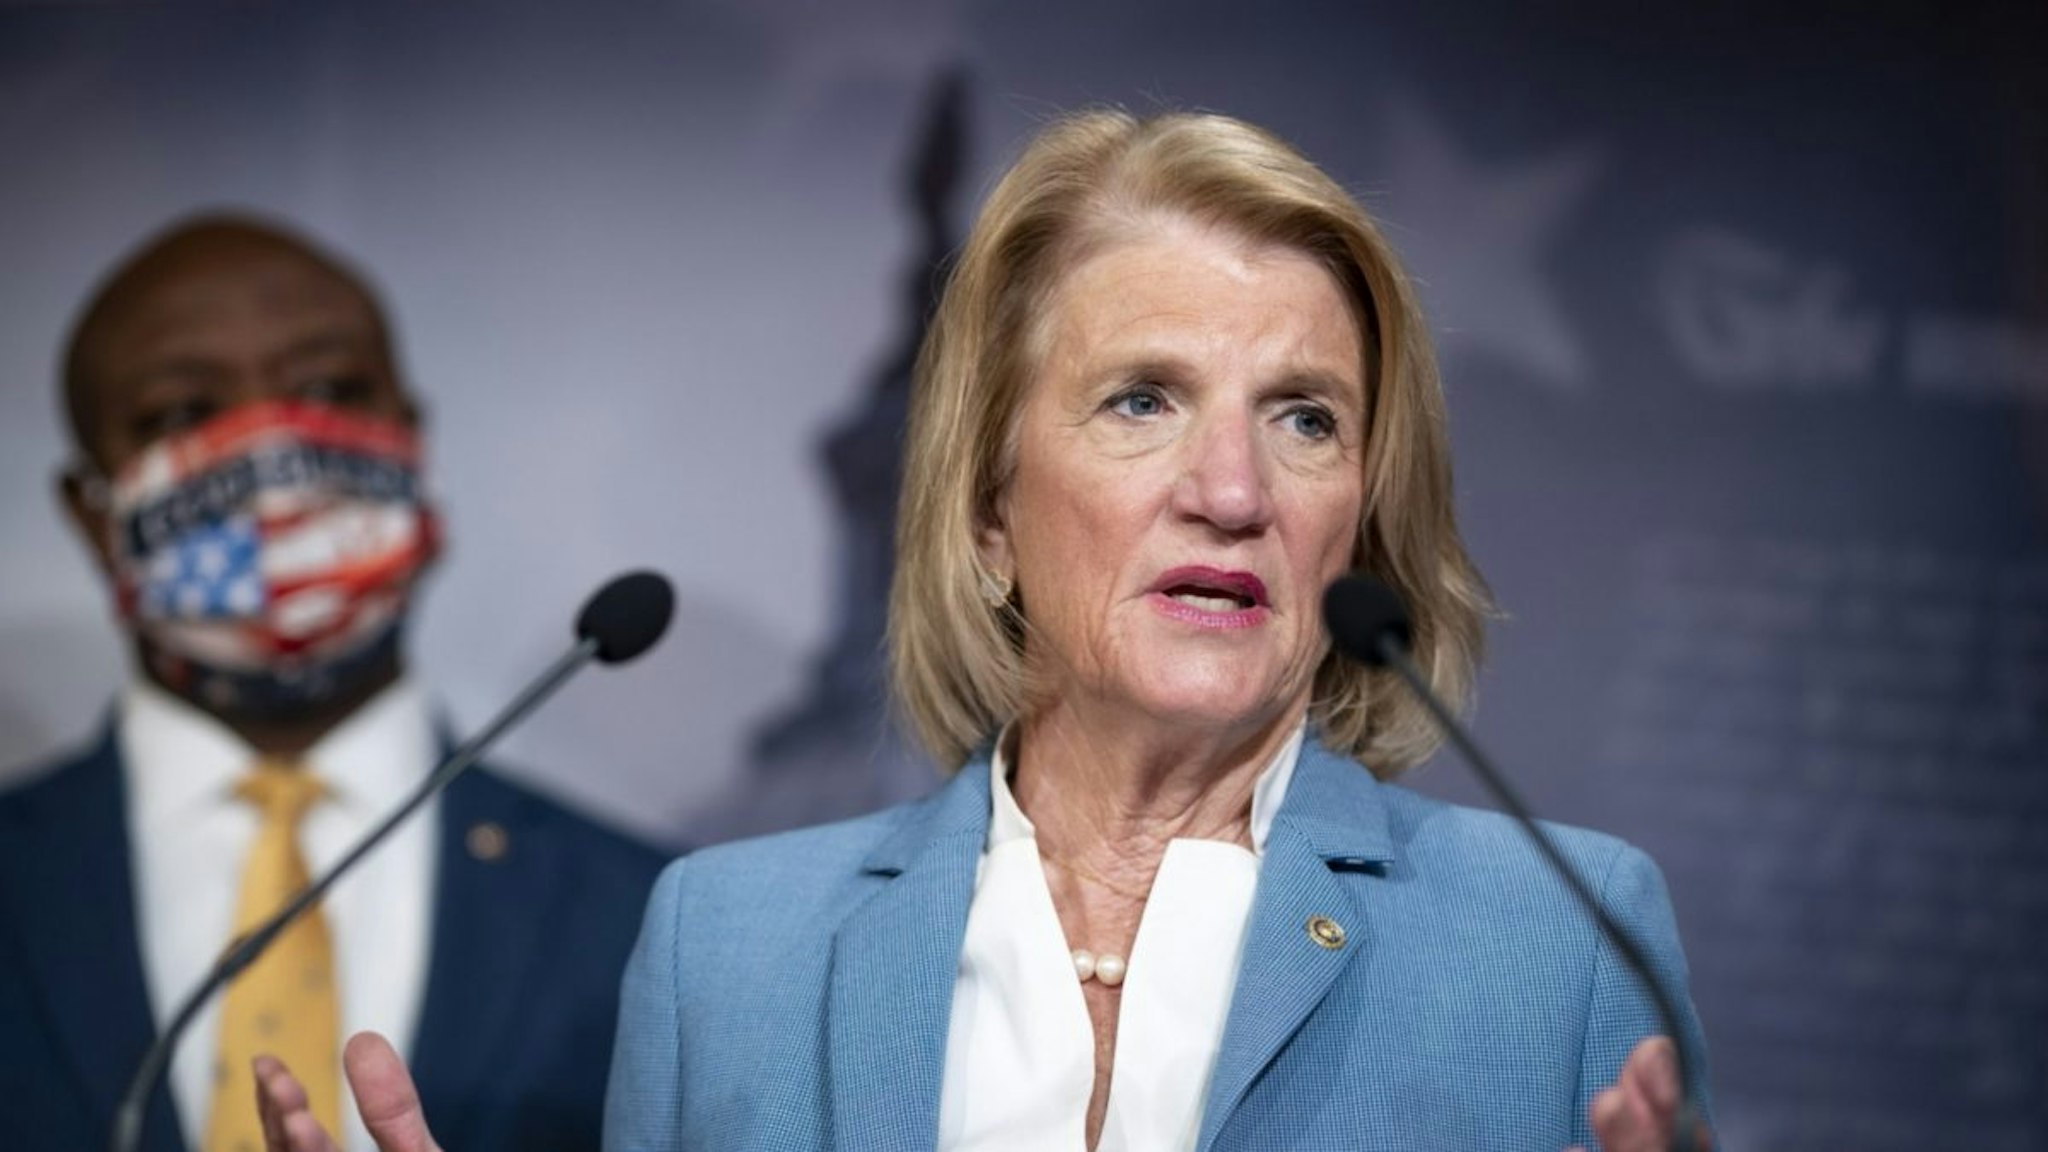 Senator Shelley Moore Capito, a Republican from West Virginia, speaks during a news conference at the U.S. Capitol in Washington, D.C., U.S., on Wednesday, June 17, 2020.